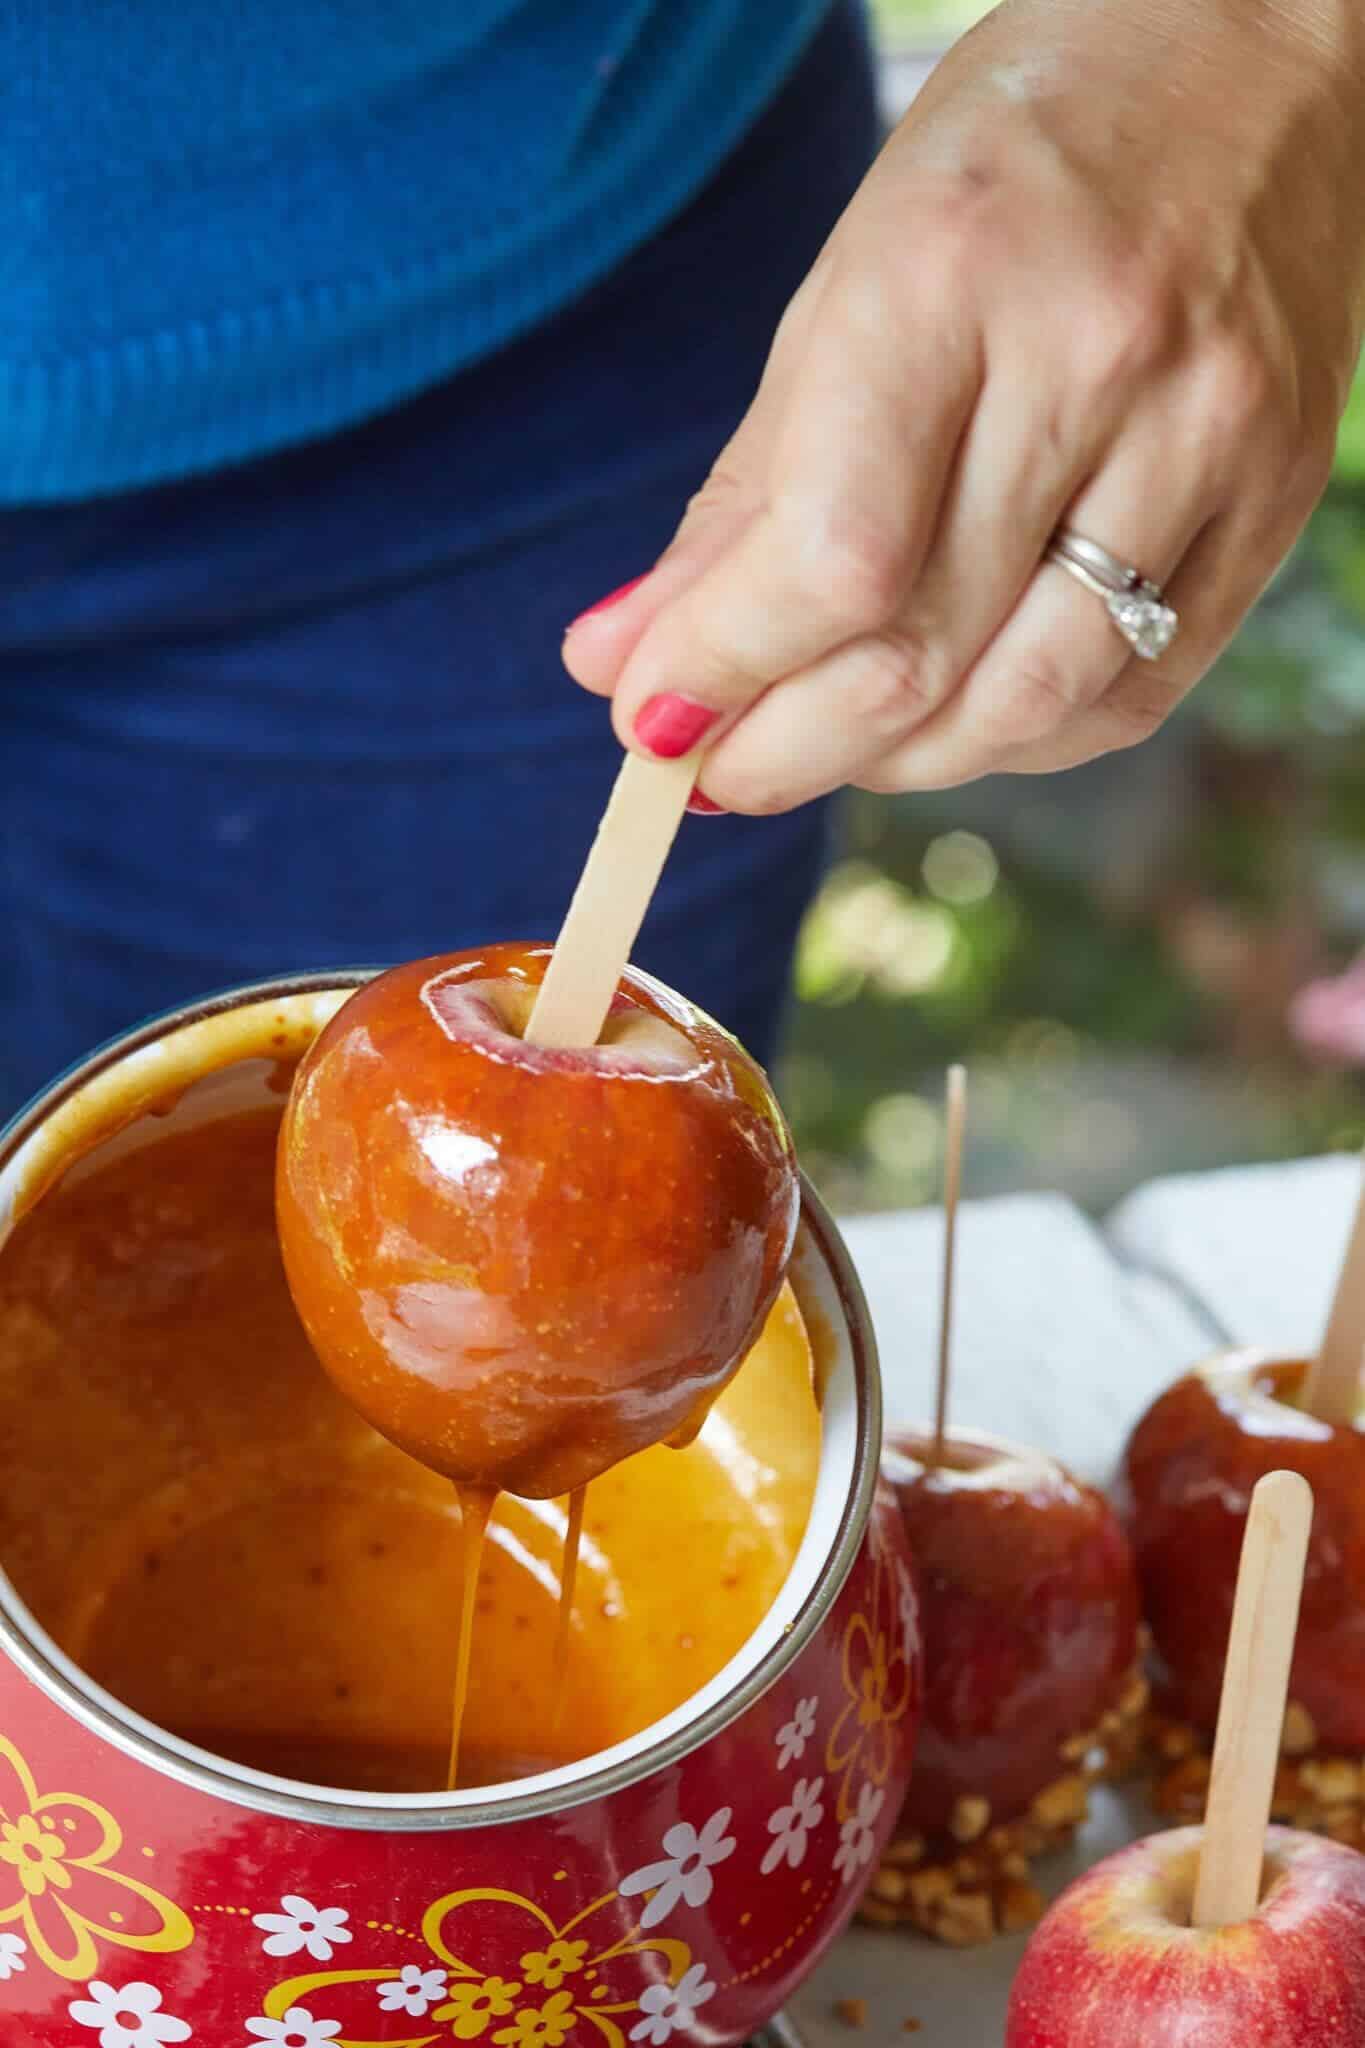 Chewy Caramel Apples have just come out of silky, glossy, and rich caramel sauce from a red fondue pot with yellow and white flowers. It's well coated with caramel all around and is ready to be decorated with toasted peanuts. It holds the most fond memories among fall recipes. 